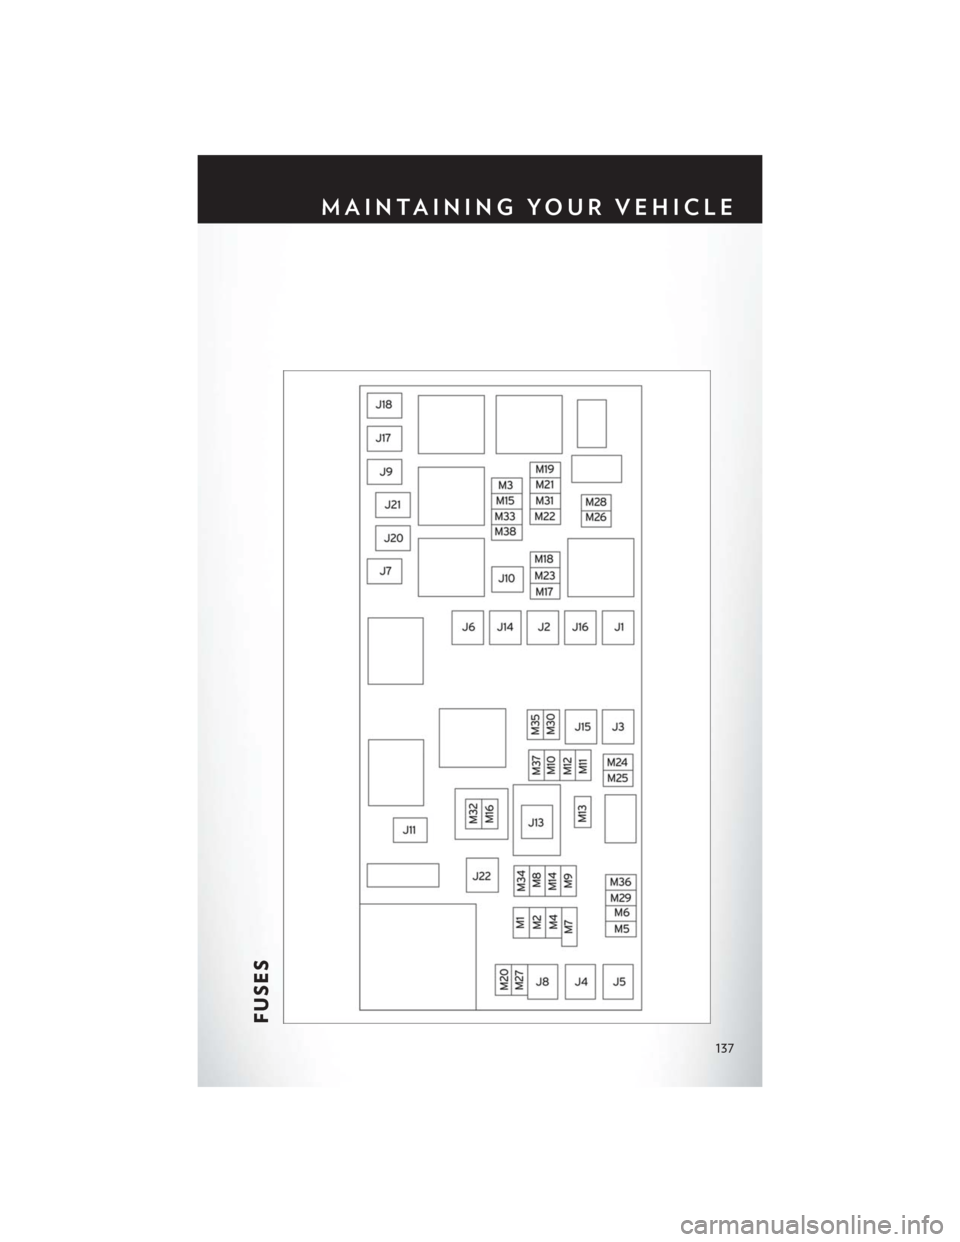 CHRYSLER TOWN AND COUNTRY 2015 5.G User Guide FUSES
MAINTAINING YOUR VEHICLE
137 